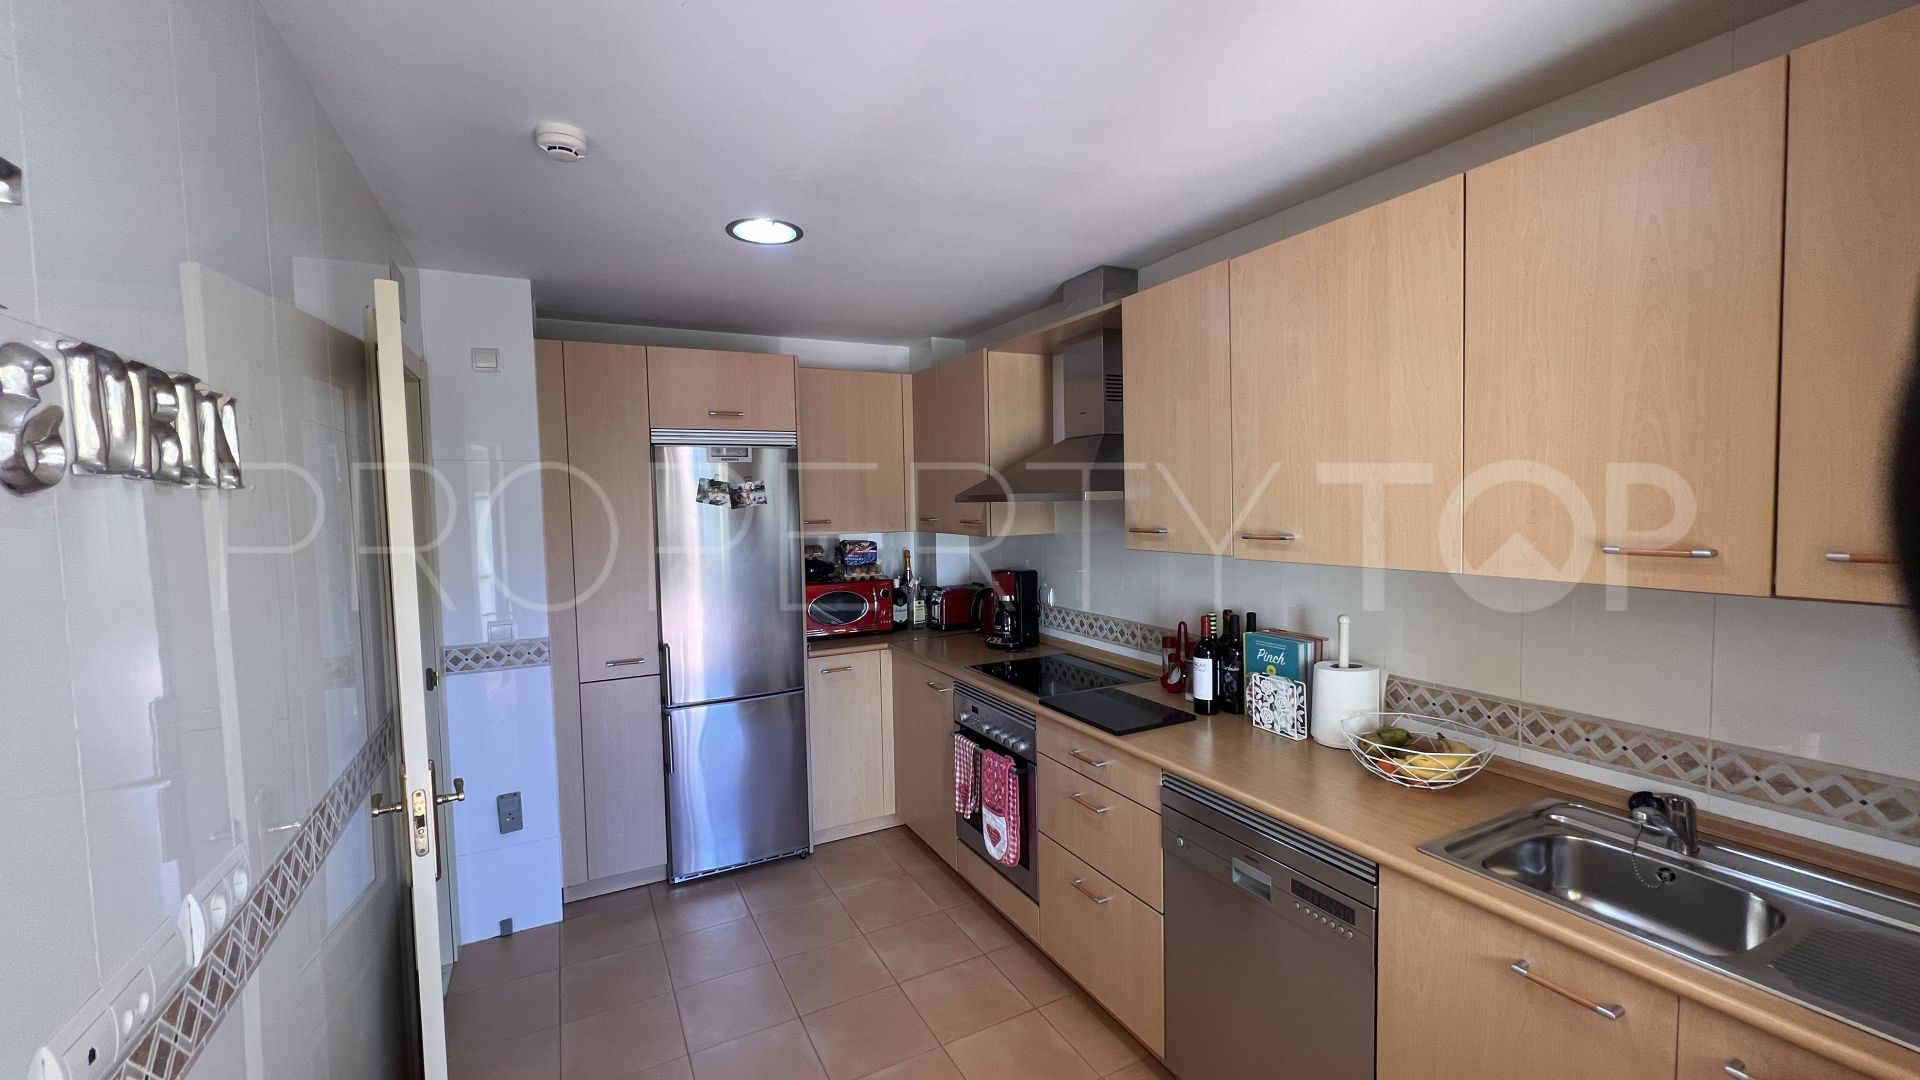 Ground floor apartment with 2 bedrooms for sale in El Chaparral